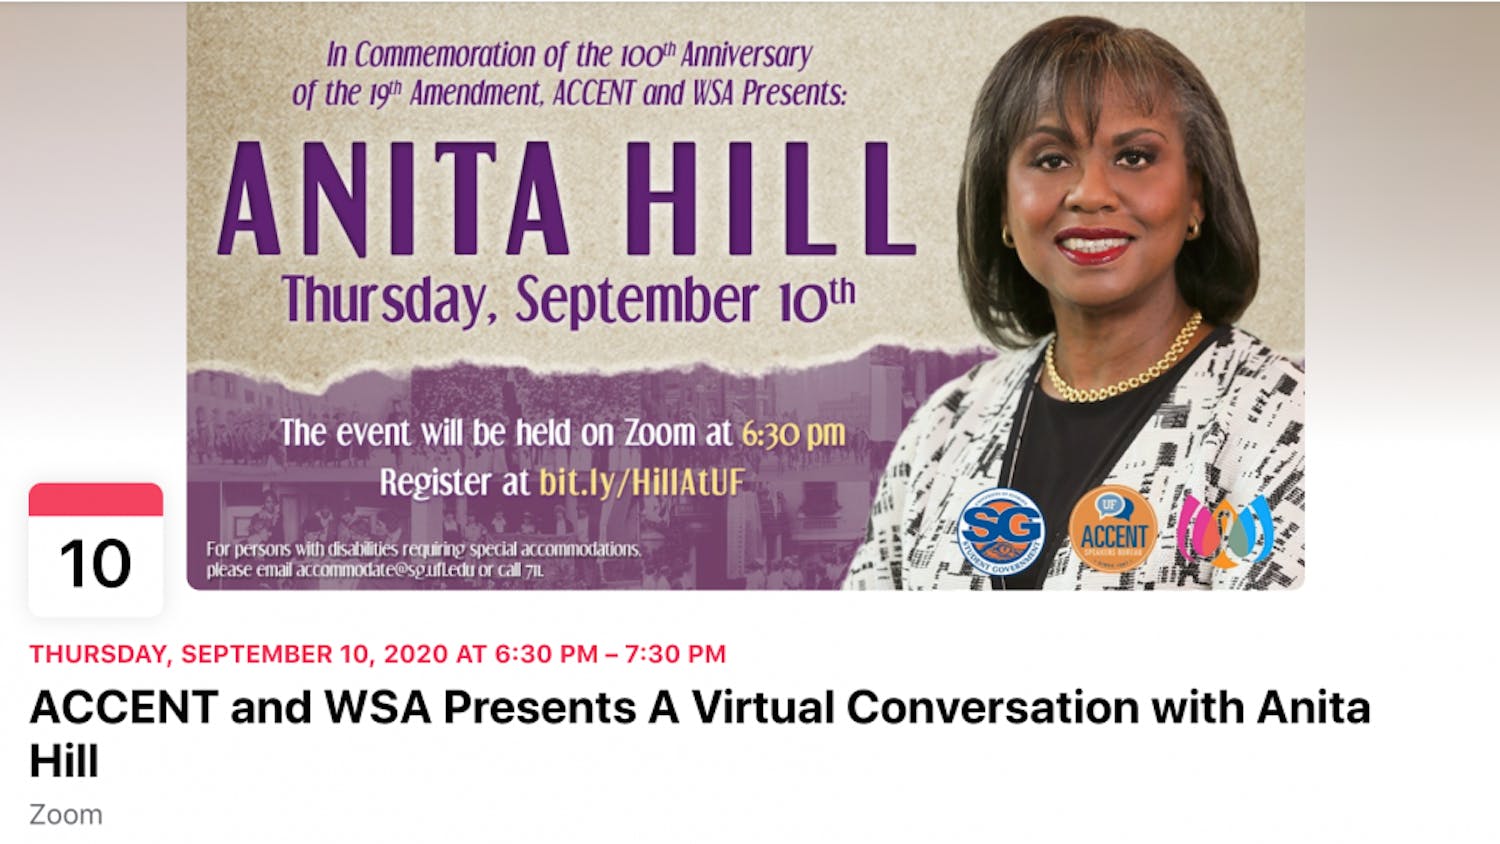 Anita Hill spoke to UF in a 45-minute virtual interview Thursday. The event was be moderated by Debra Walker King, a UF English professor, and was hosted by Accent Speakers Bureau and the Women’s Student Association.